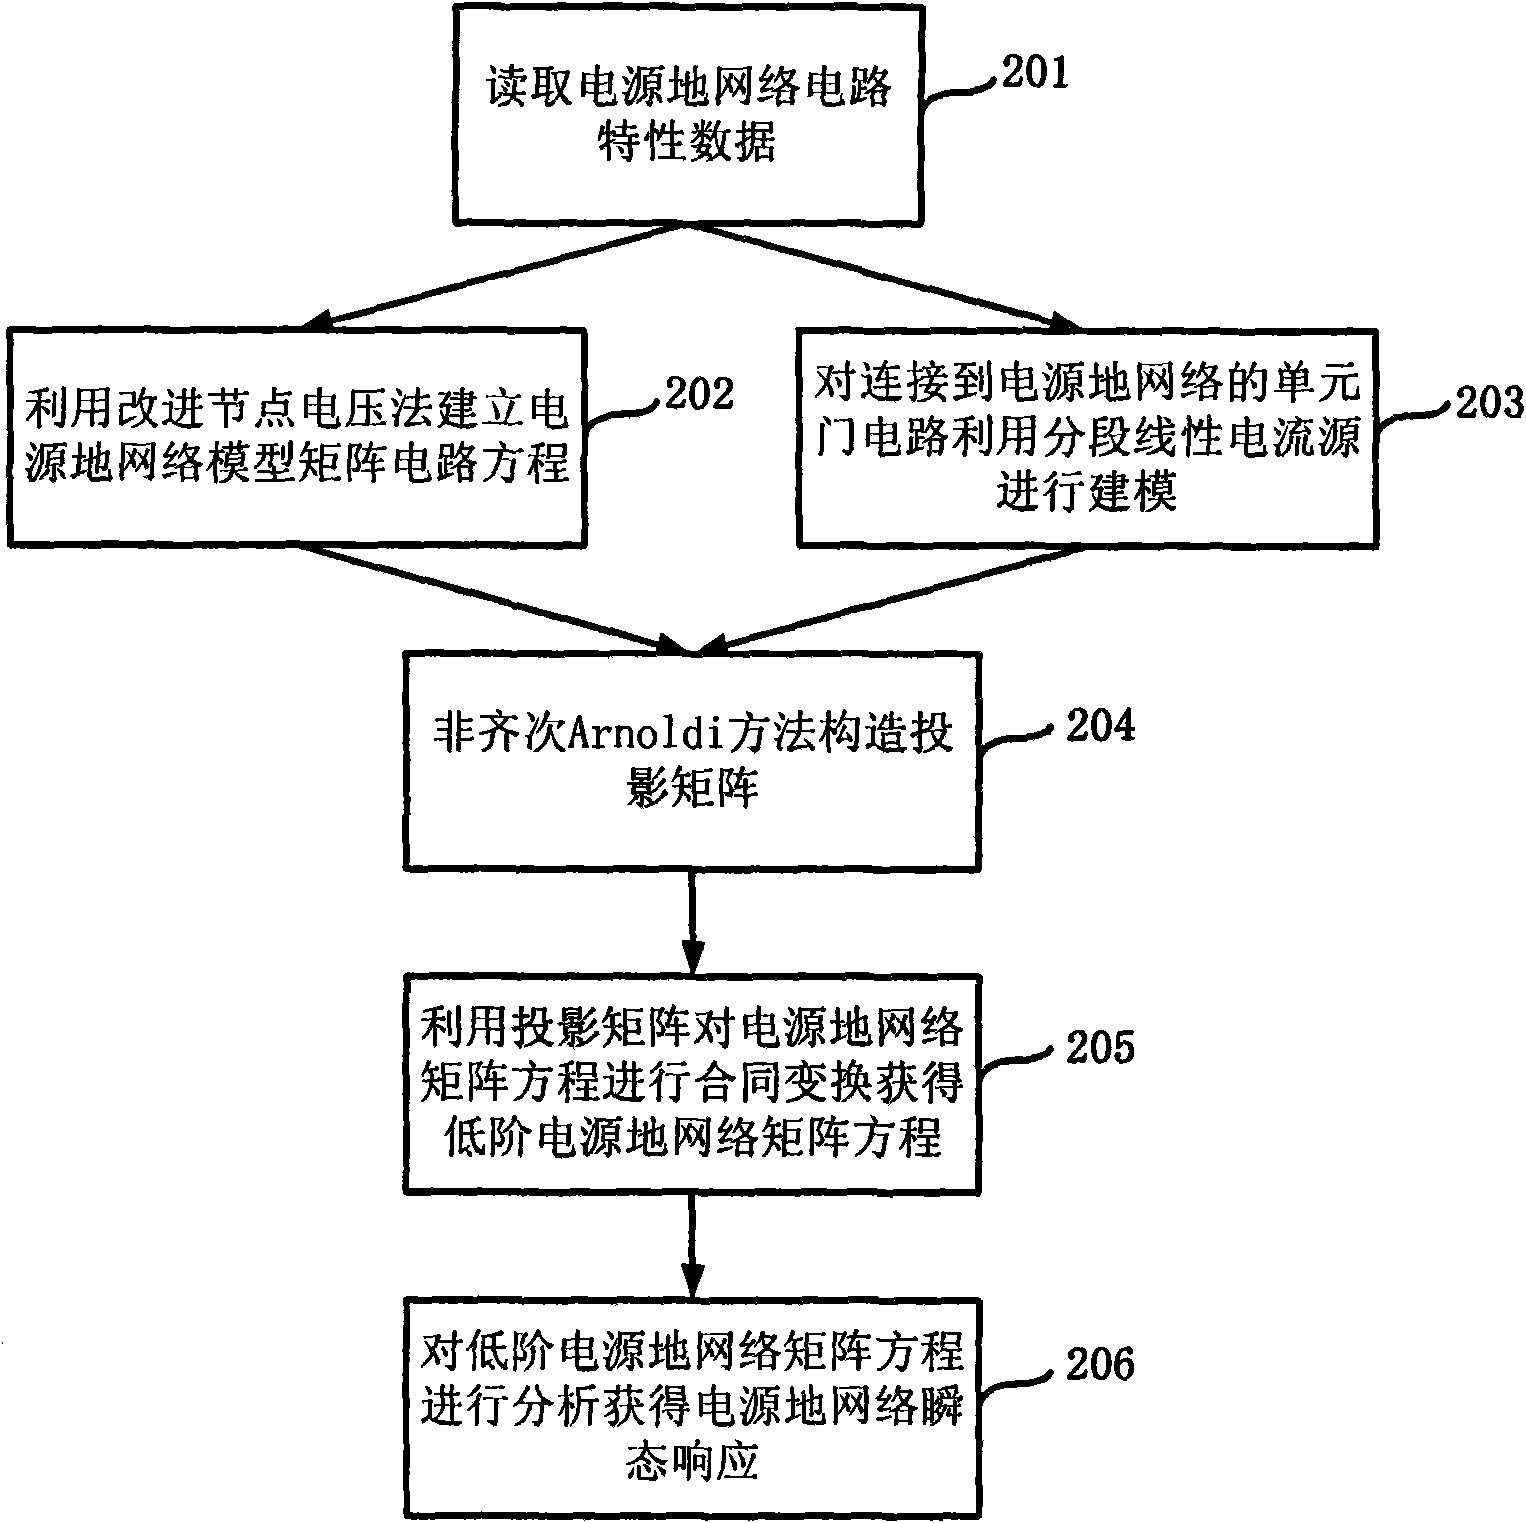 Analytical method and device for power ground network of integrated circuit